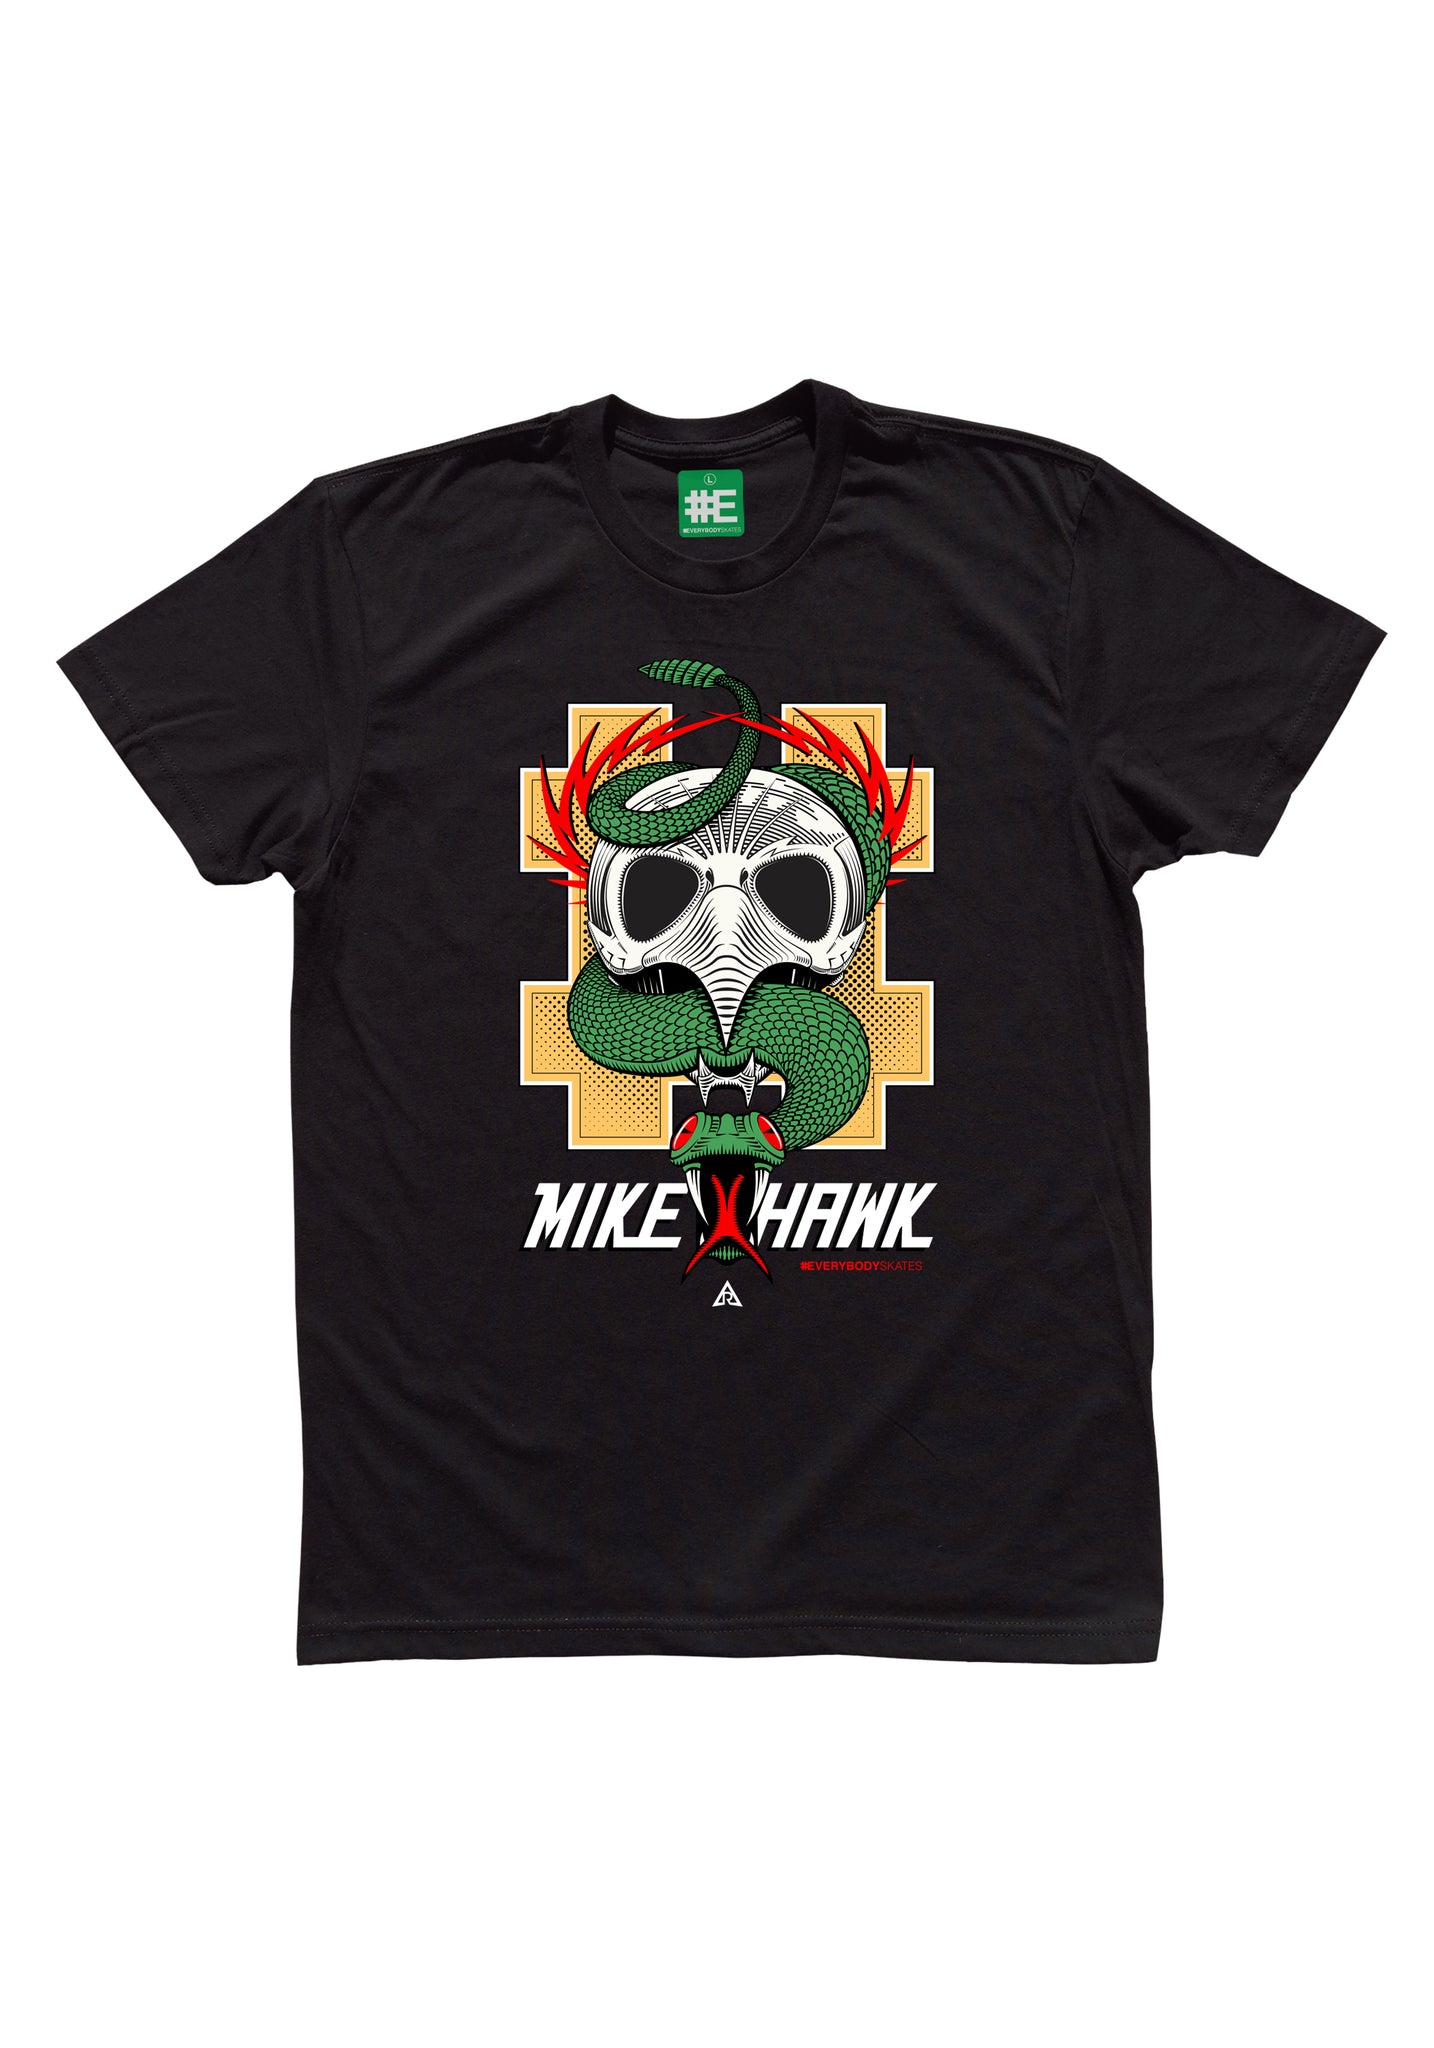 Mike Hawk Graphic T-shirt